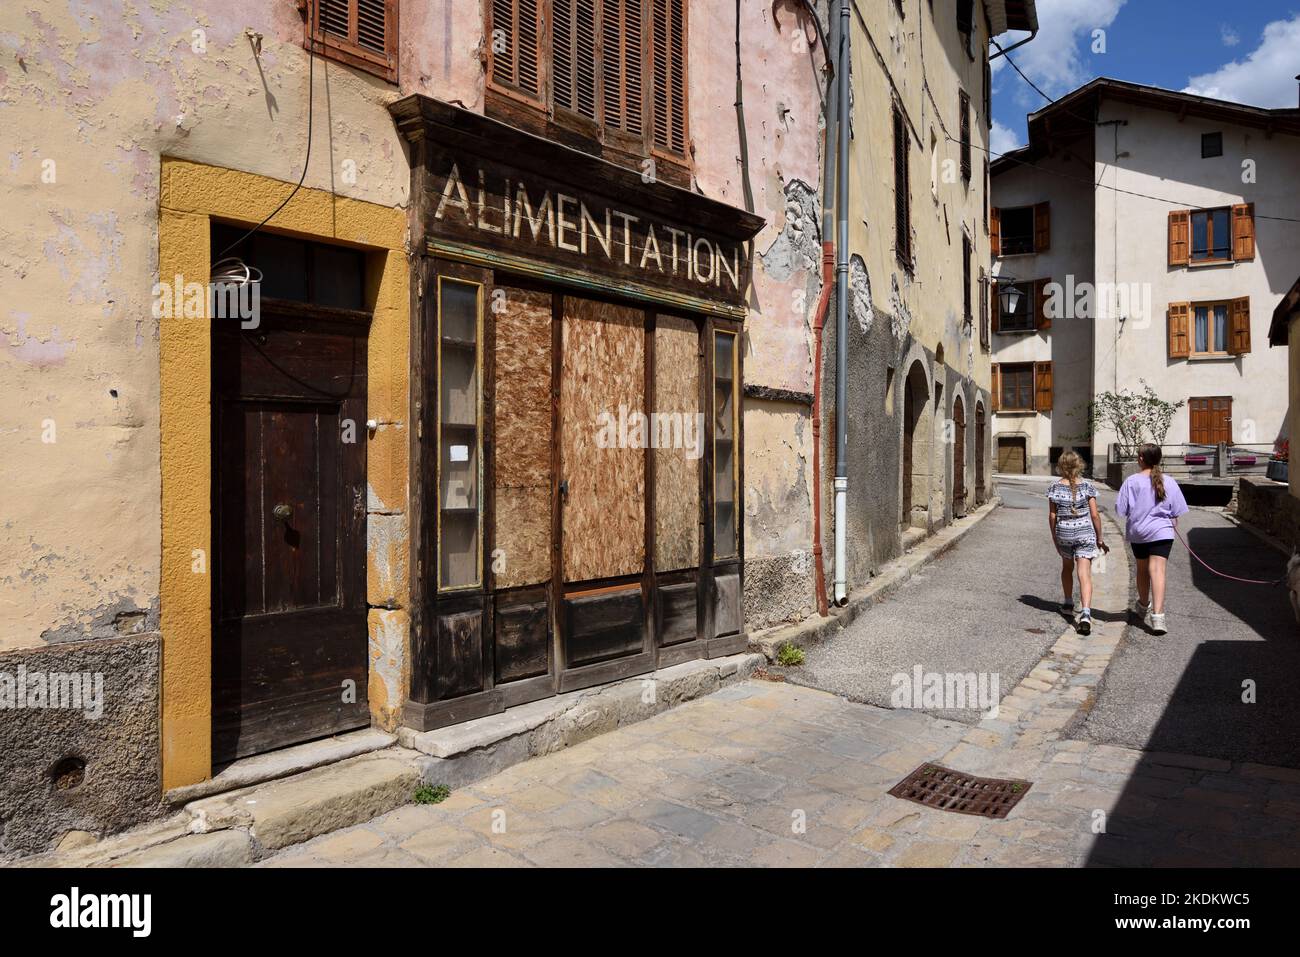 Young Girls Walk Past a Vacant, Closed, Boarded-Up or Abandoned Village Shop or Corner Shop in Beauvezer Alpes-de-Haute-Provence Provence France Stock Photo